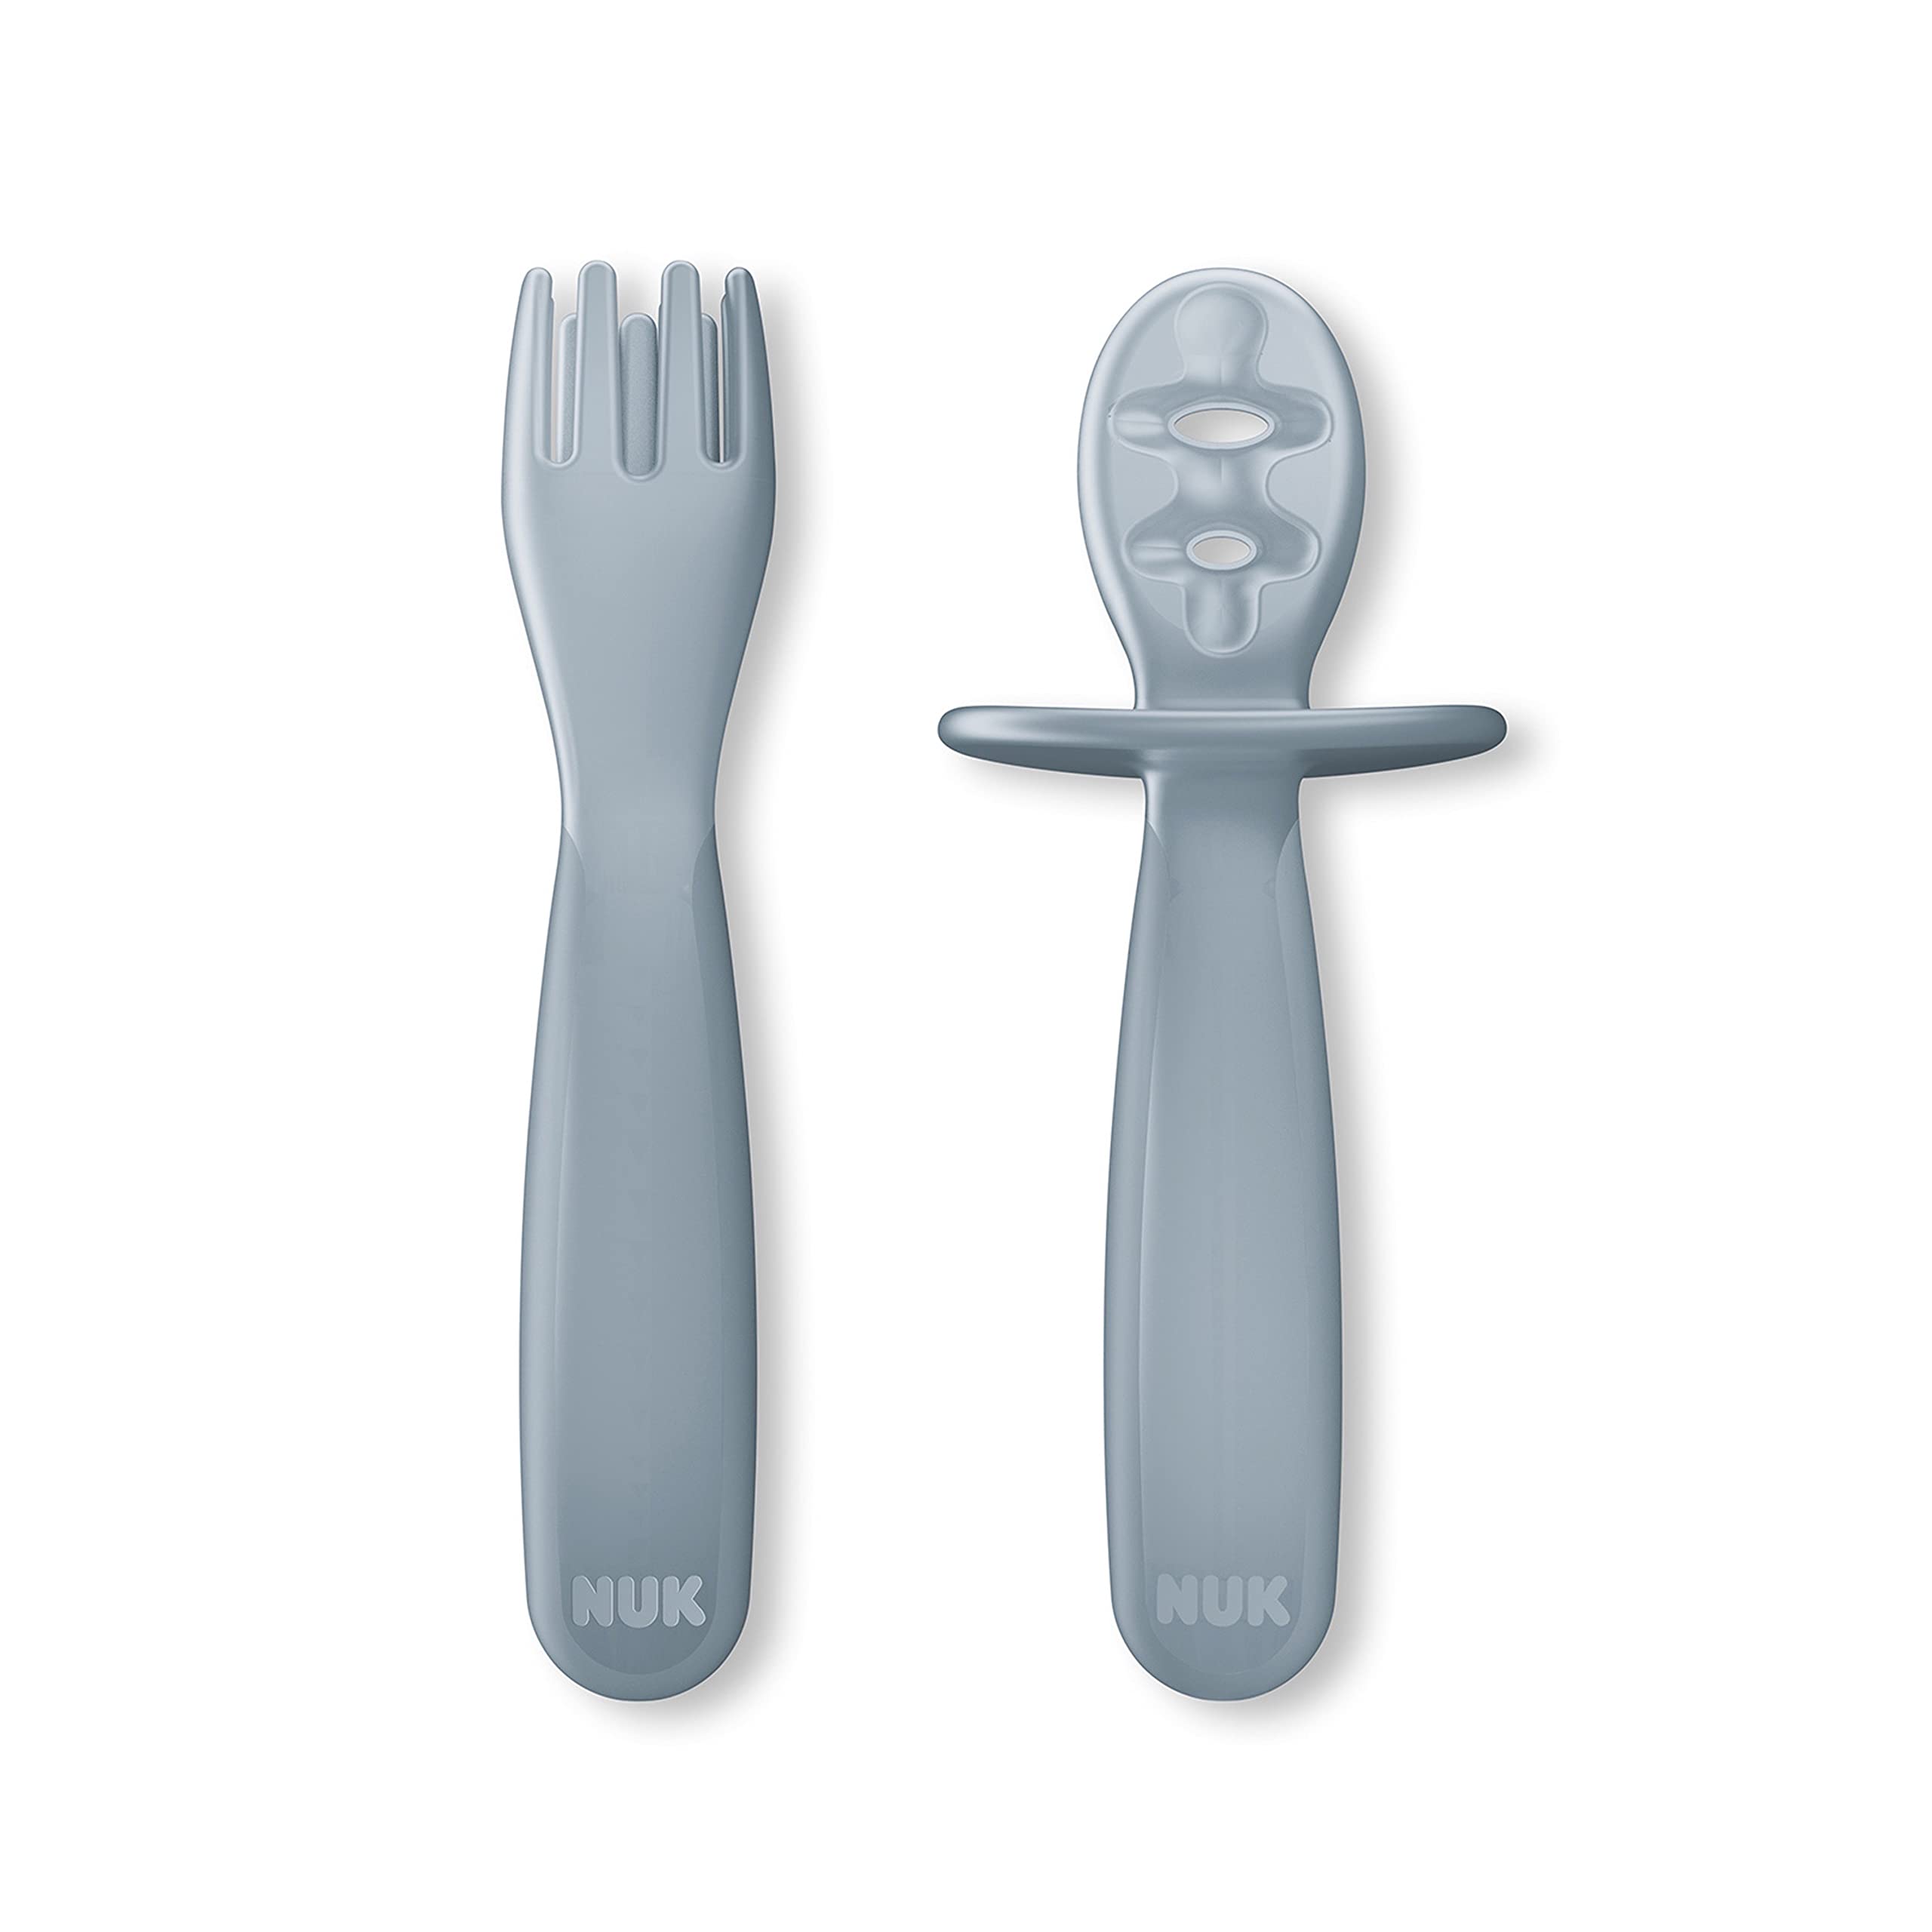 NUK Pretensil Dipper Spoon and Fork, 2 Pack, 6+ Months, Gray $3.99